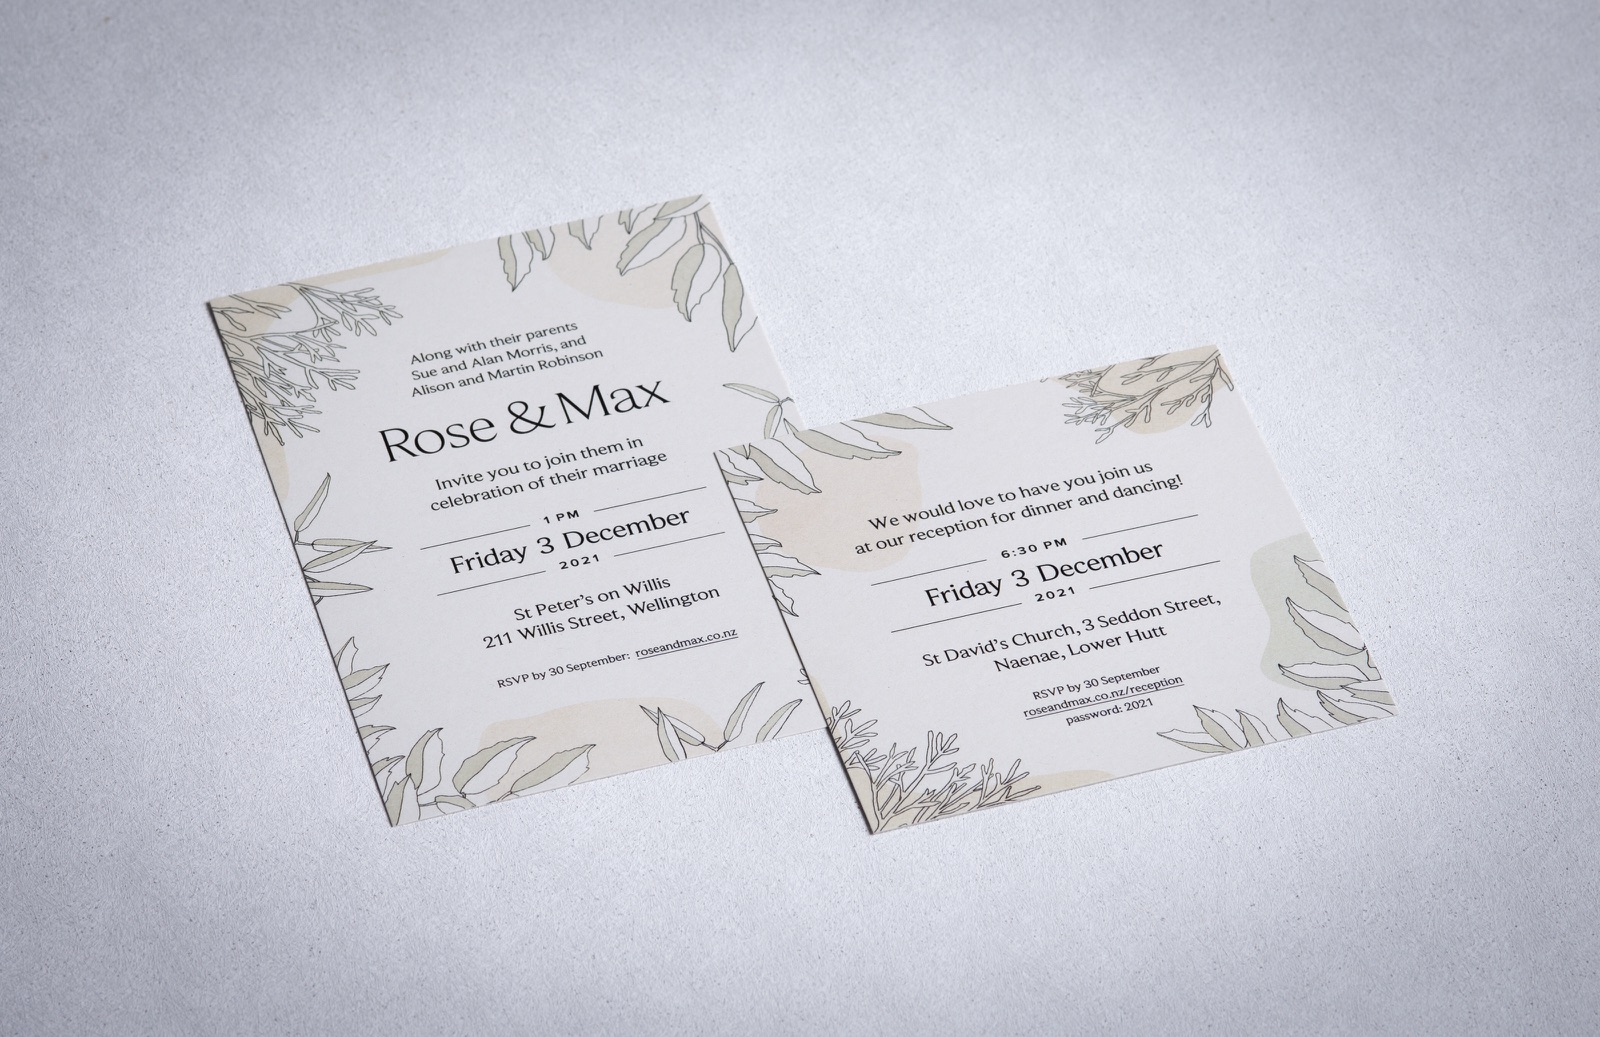 Crafted with Care: Printing Rose & Max's Wedding Invitation Set